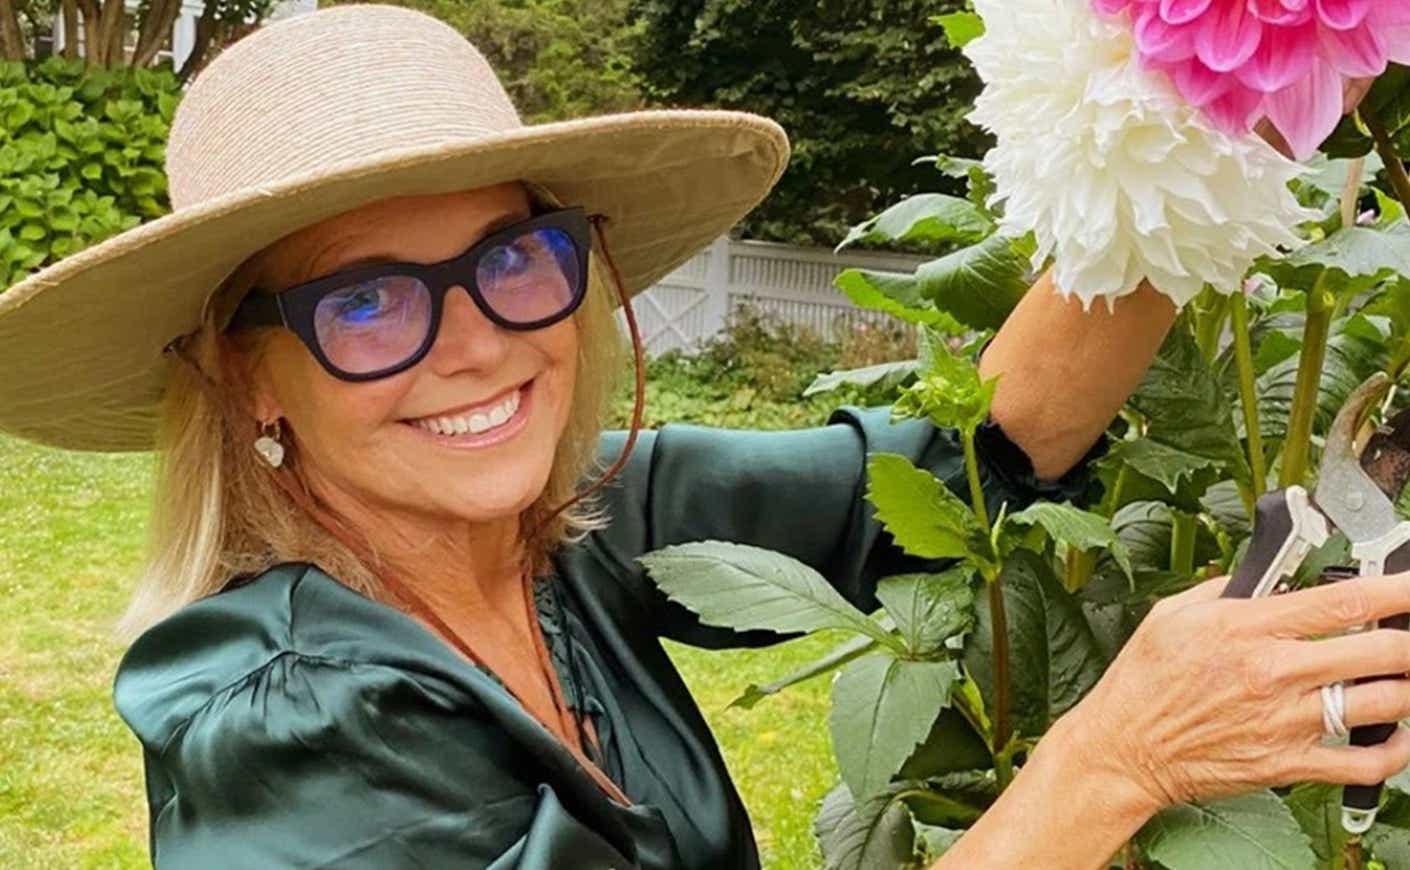 Katie Couric tending to pink and white flowers in her garden